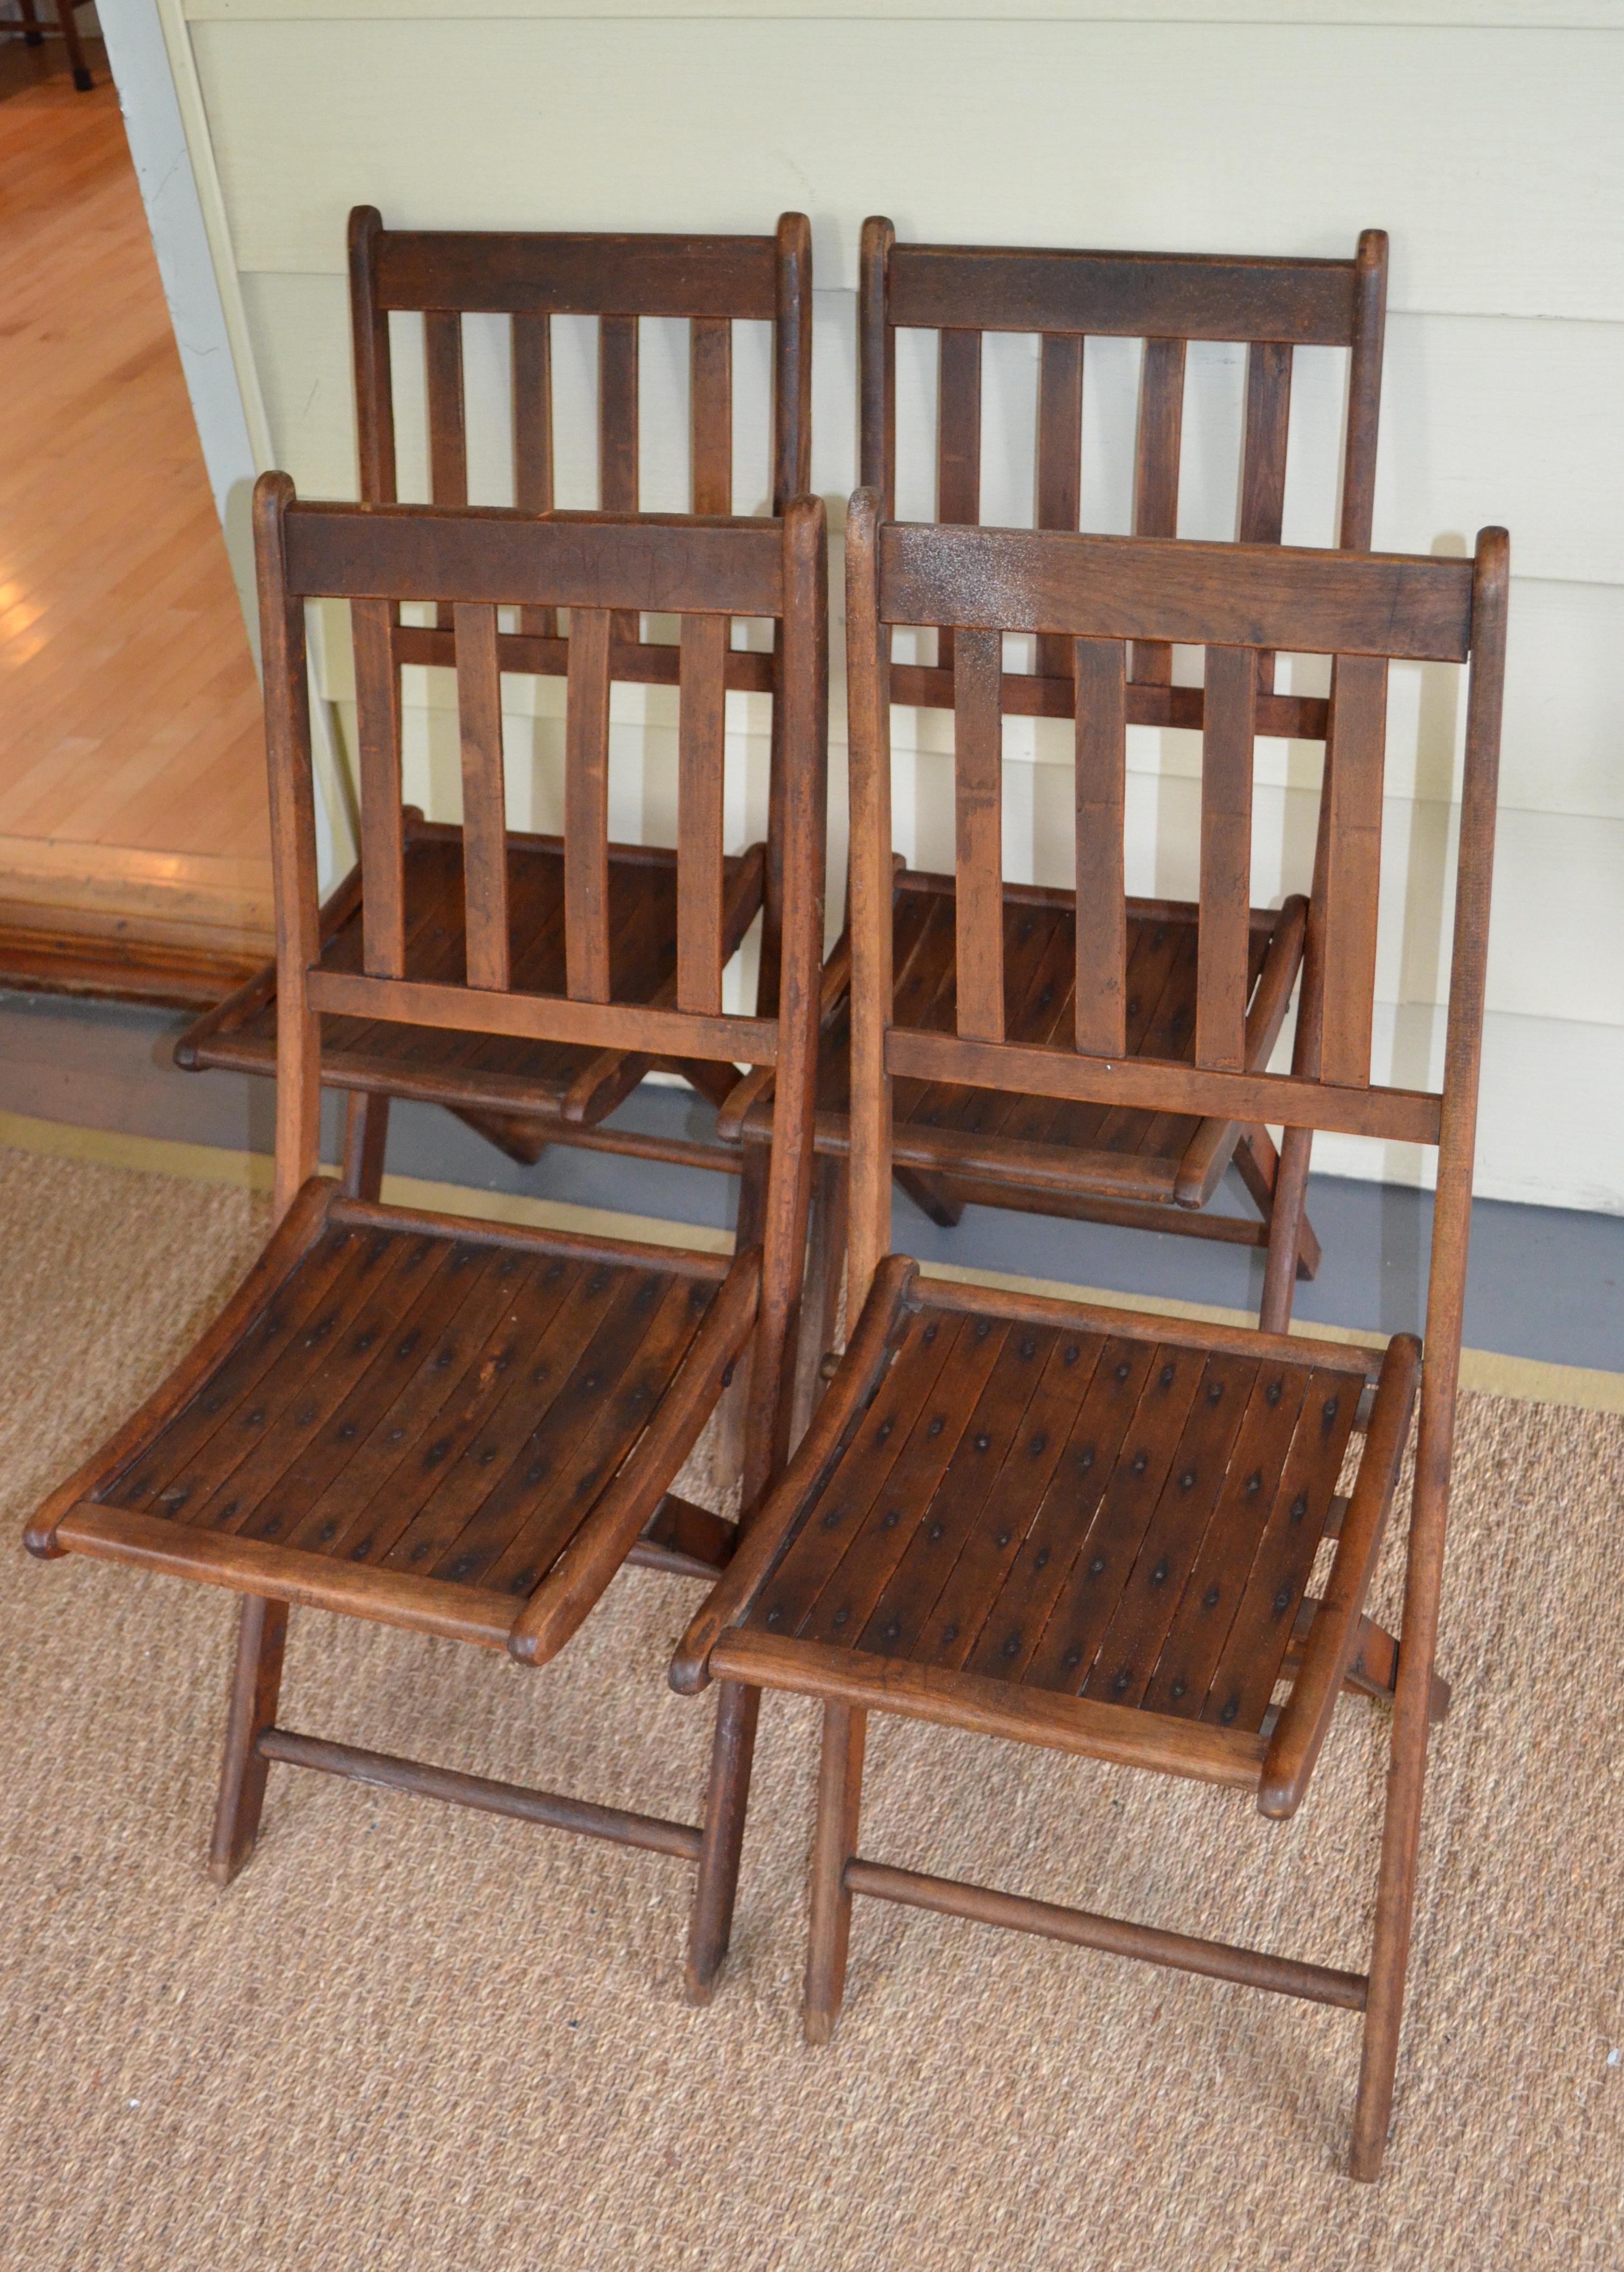 Chairs of Oak, Folding, Late 19th Century European, Set of 4, Multiple Sets In Good Condition For Sale In Madison, WI